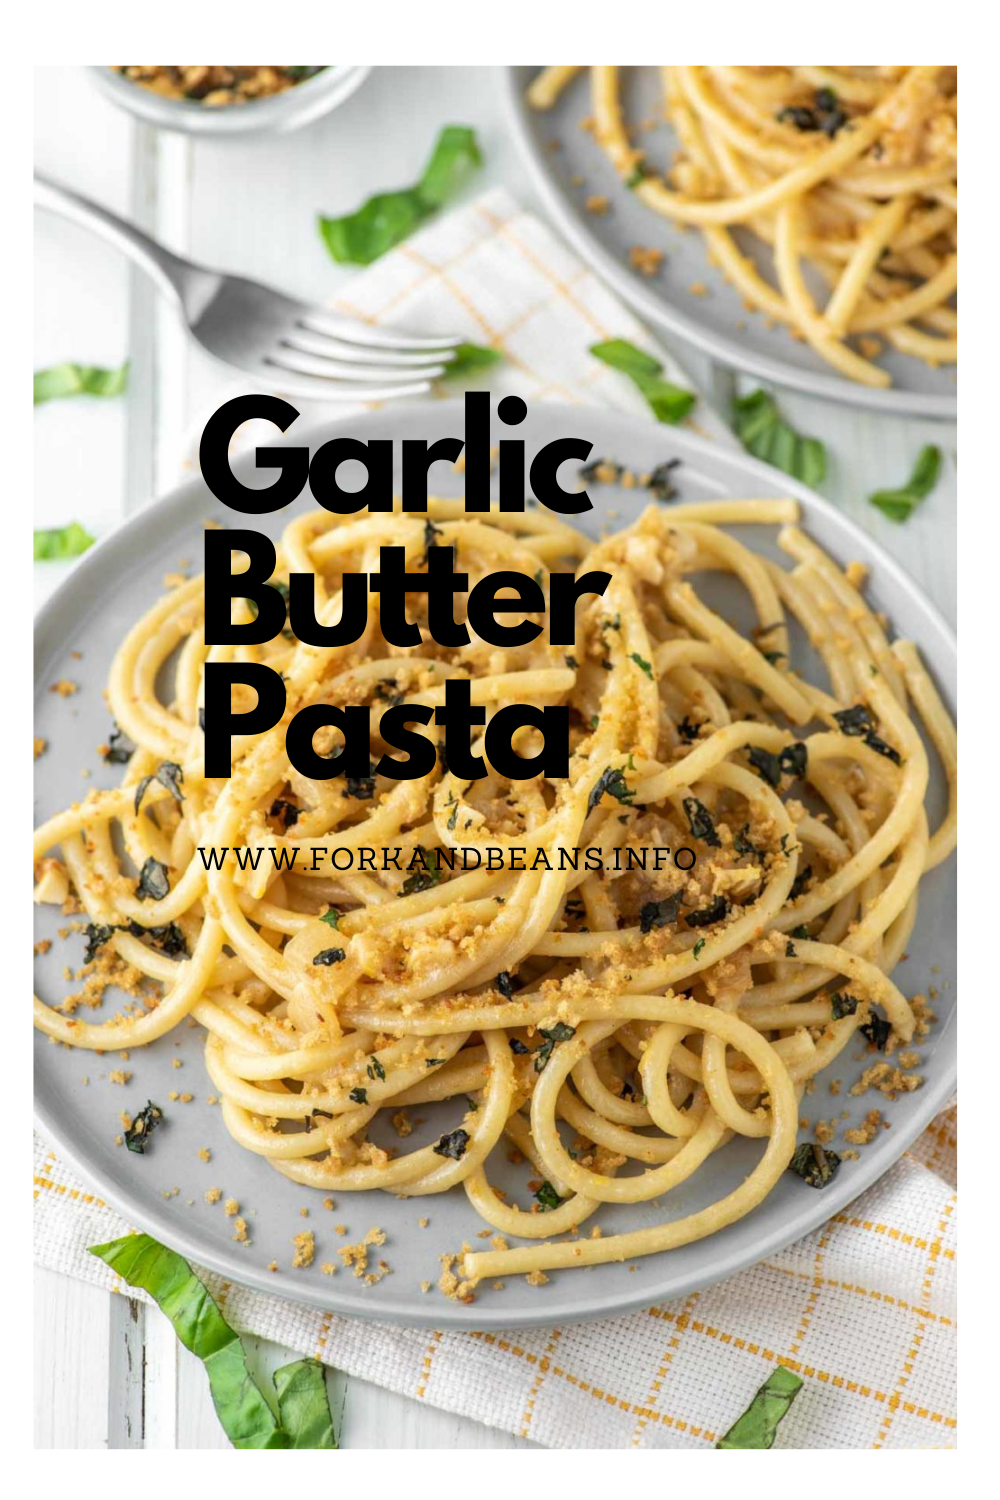 Simple Pasta with Garlic Butter